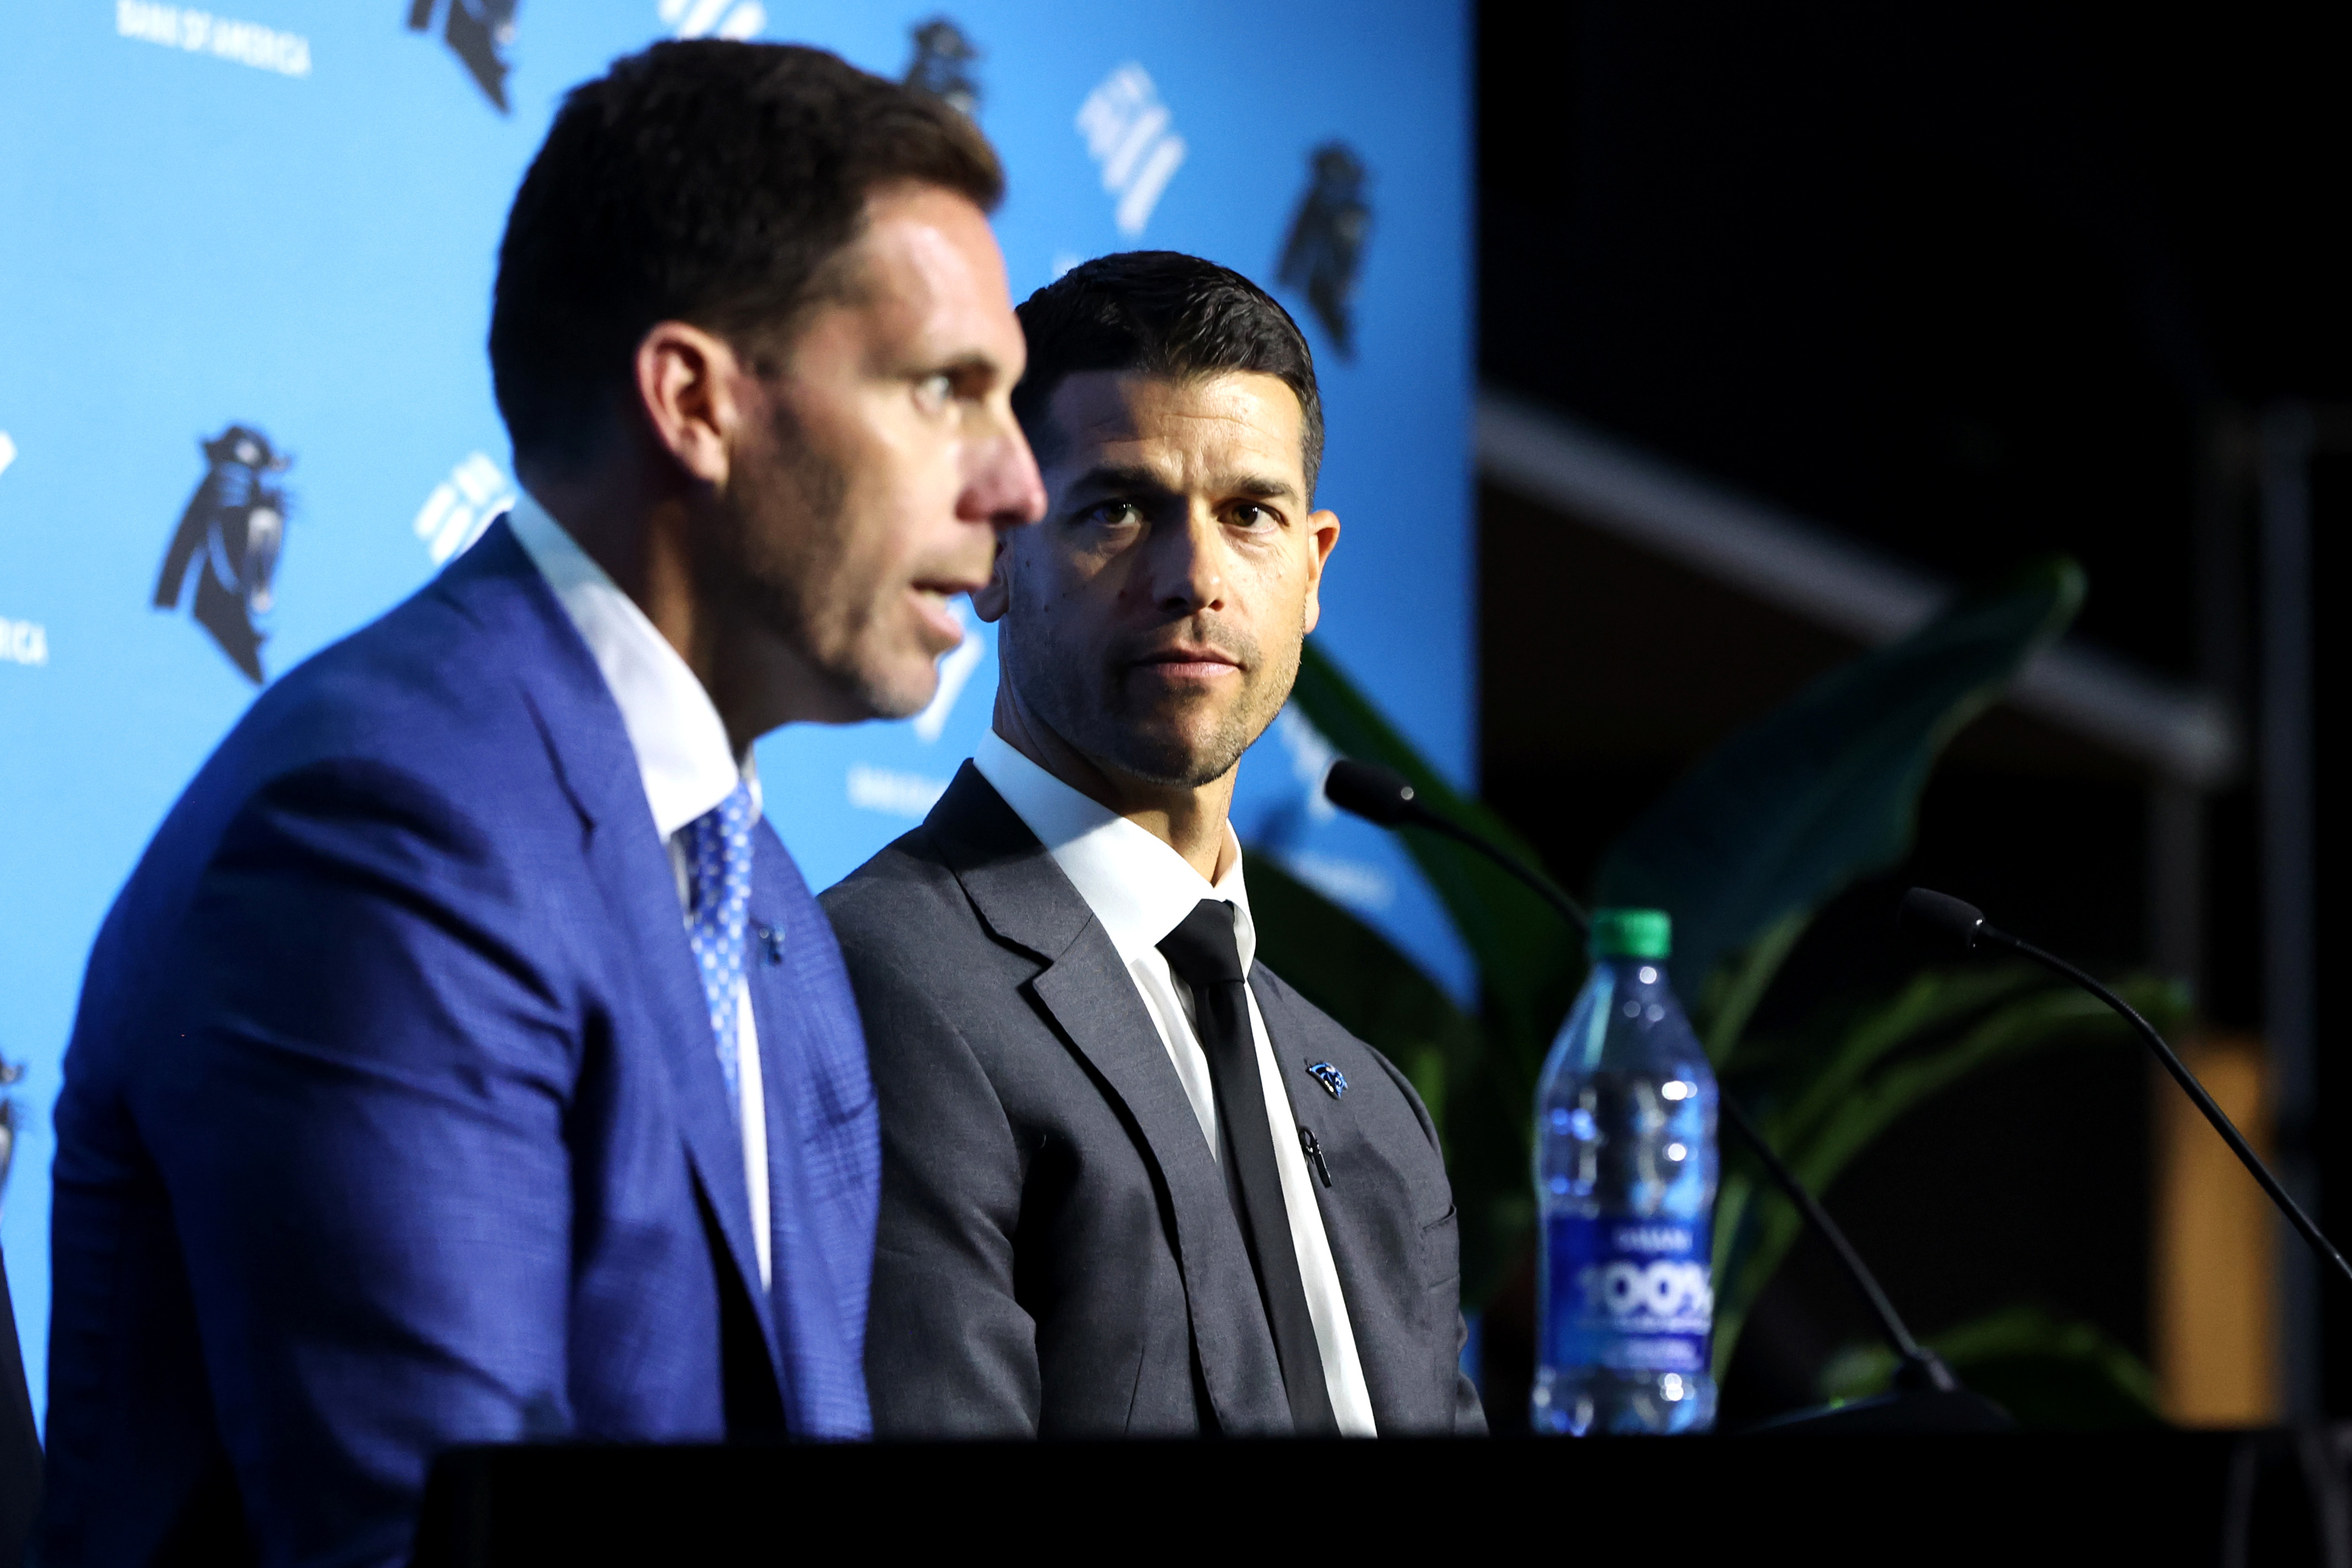 Two men in suits at a sports press conference, one speaking at the podium